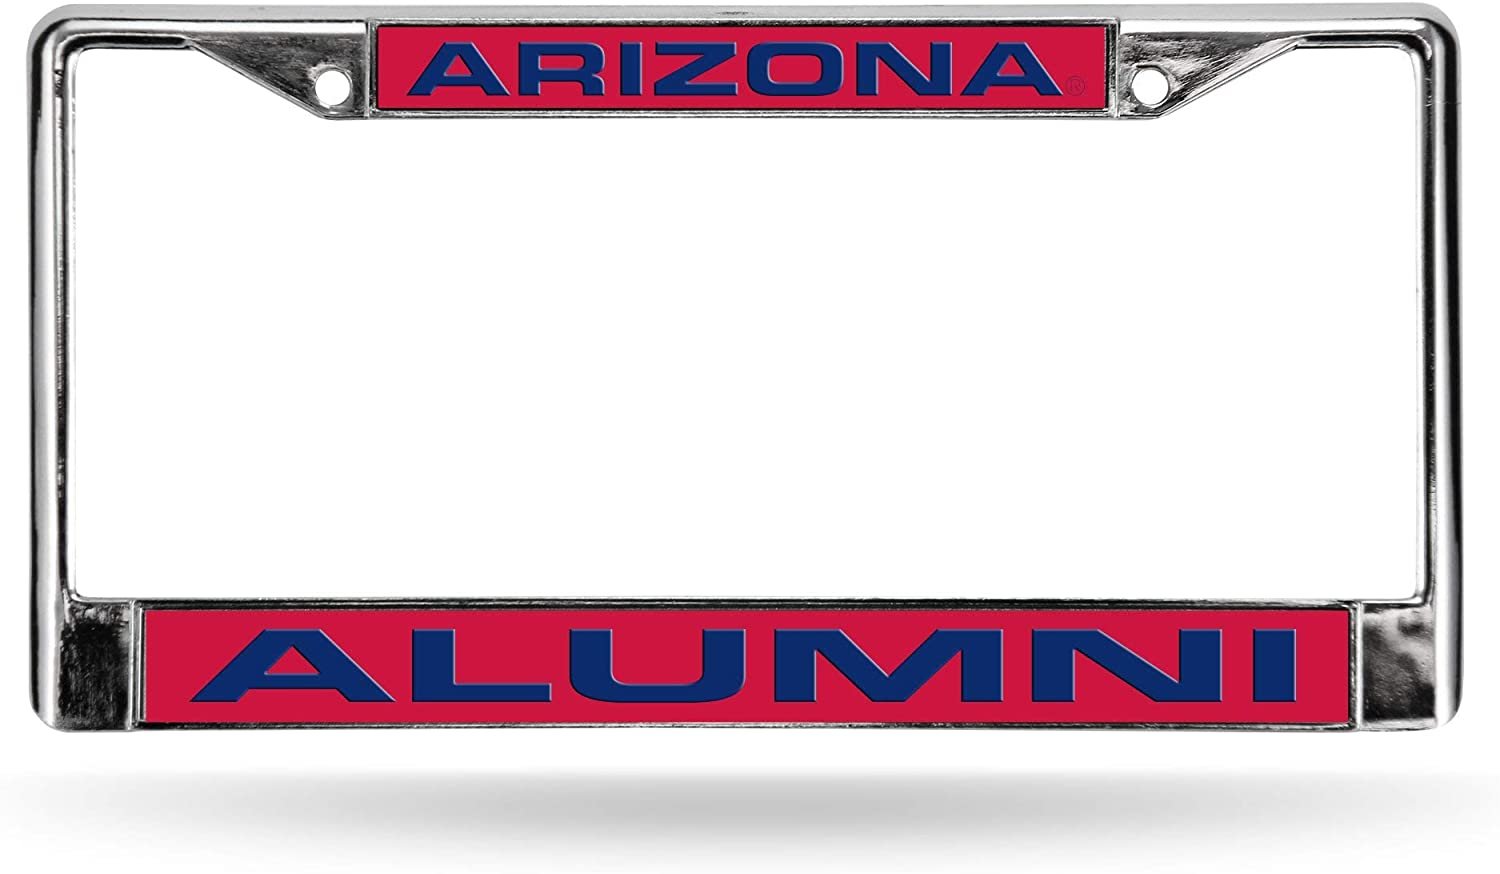 University of Arizona Alumni Chrome Metal License Plate Frame Tag Cover, Laser Mirrored Inserts, 12x6 Inch